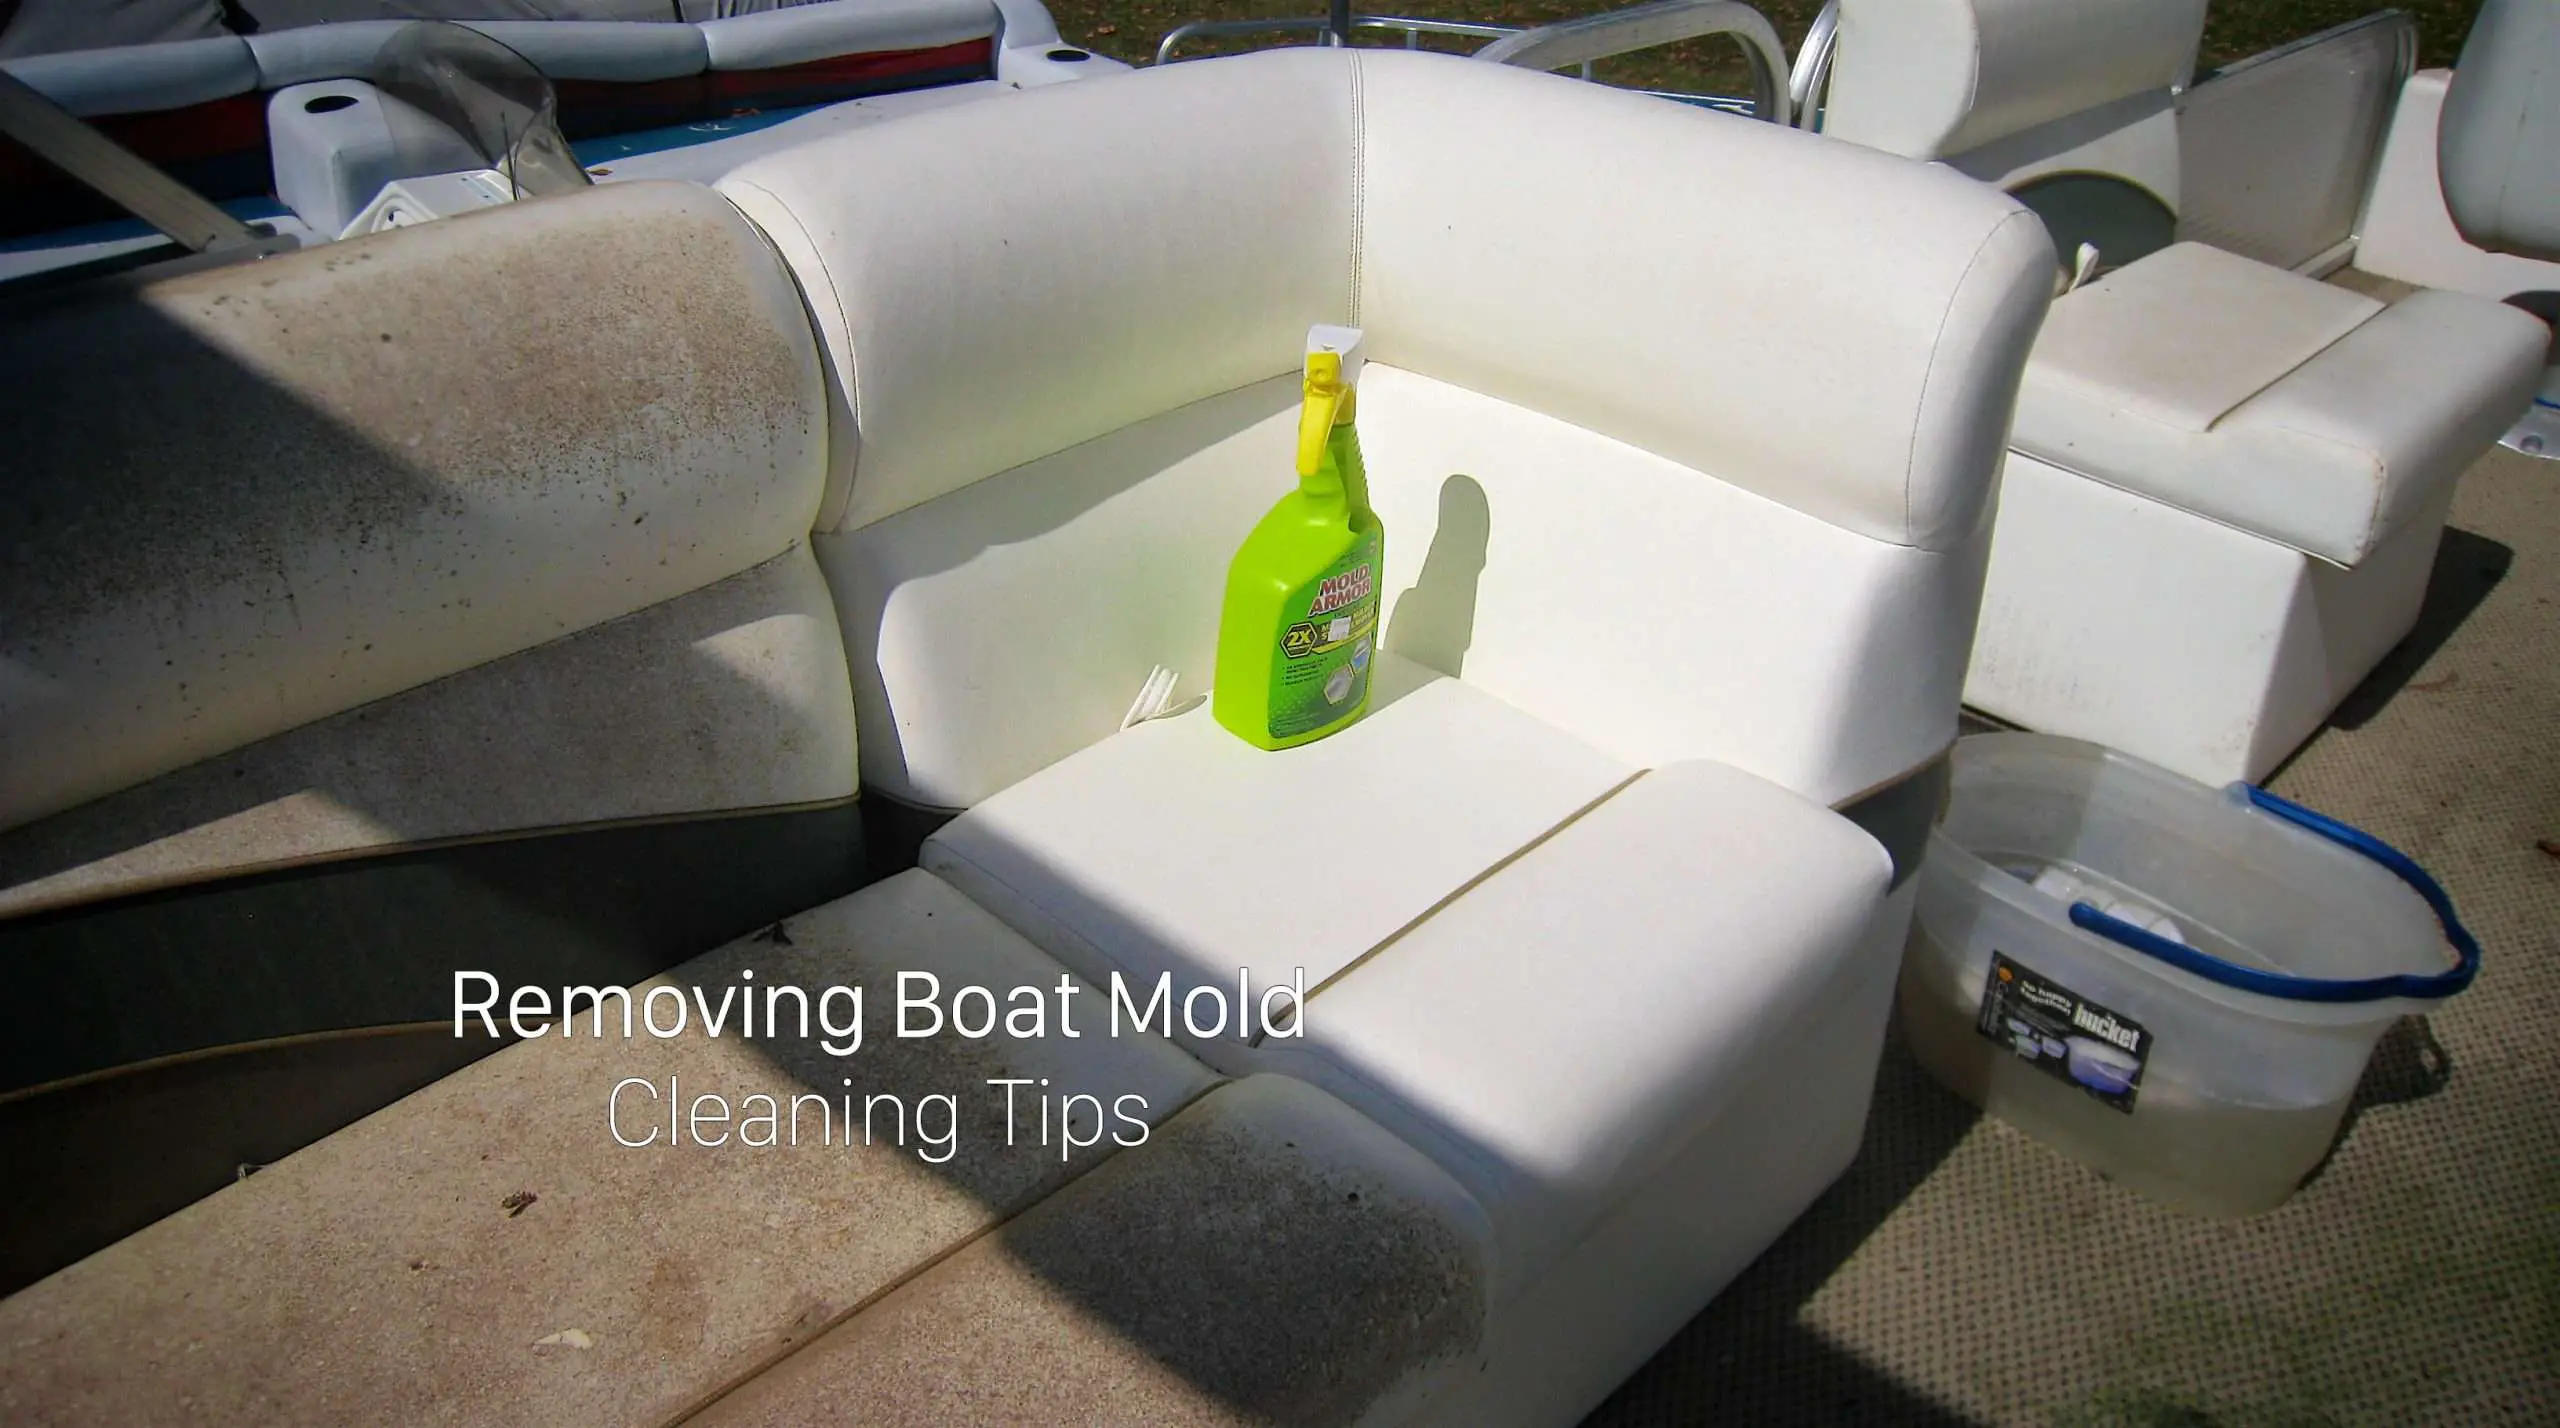 Boat Mold: Removal